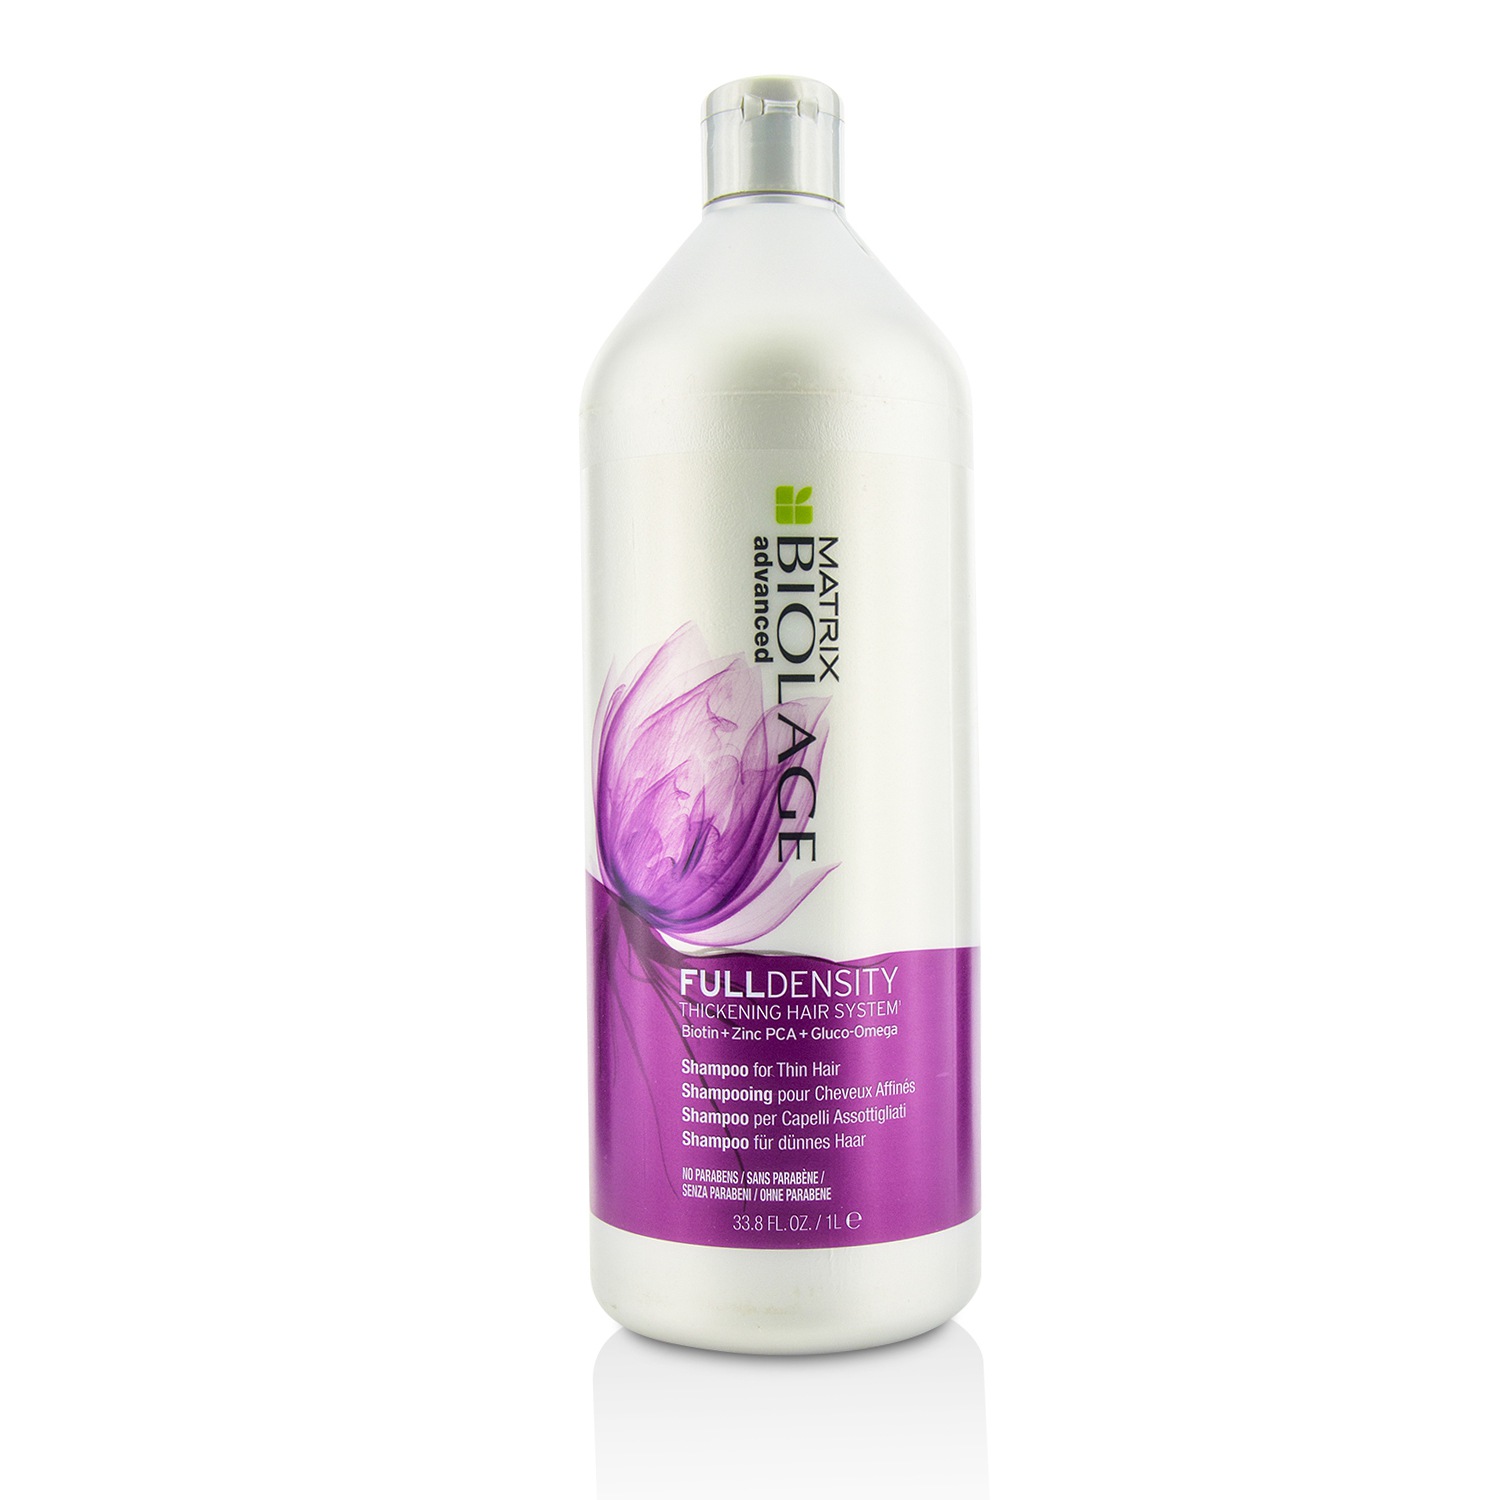 Biolage Advanced FullDensity Thickening Hair System Shampoo (For Thin Hair) Matrix Image